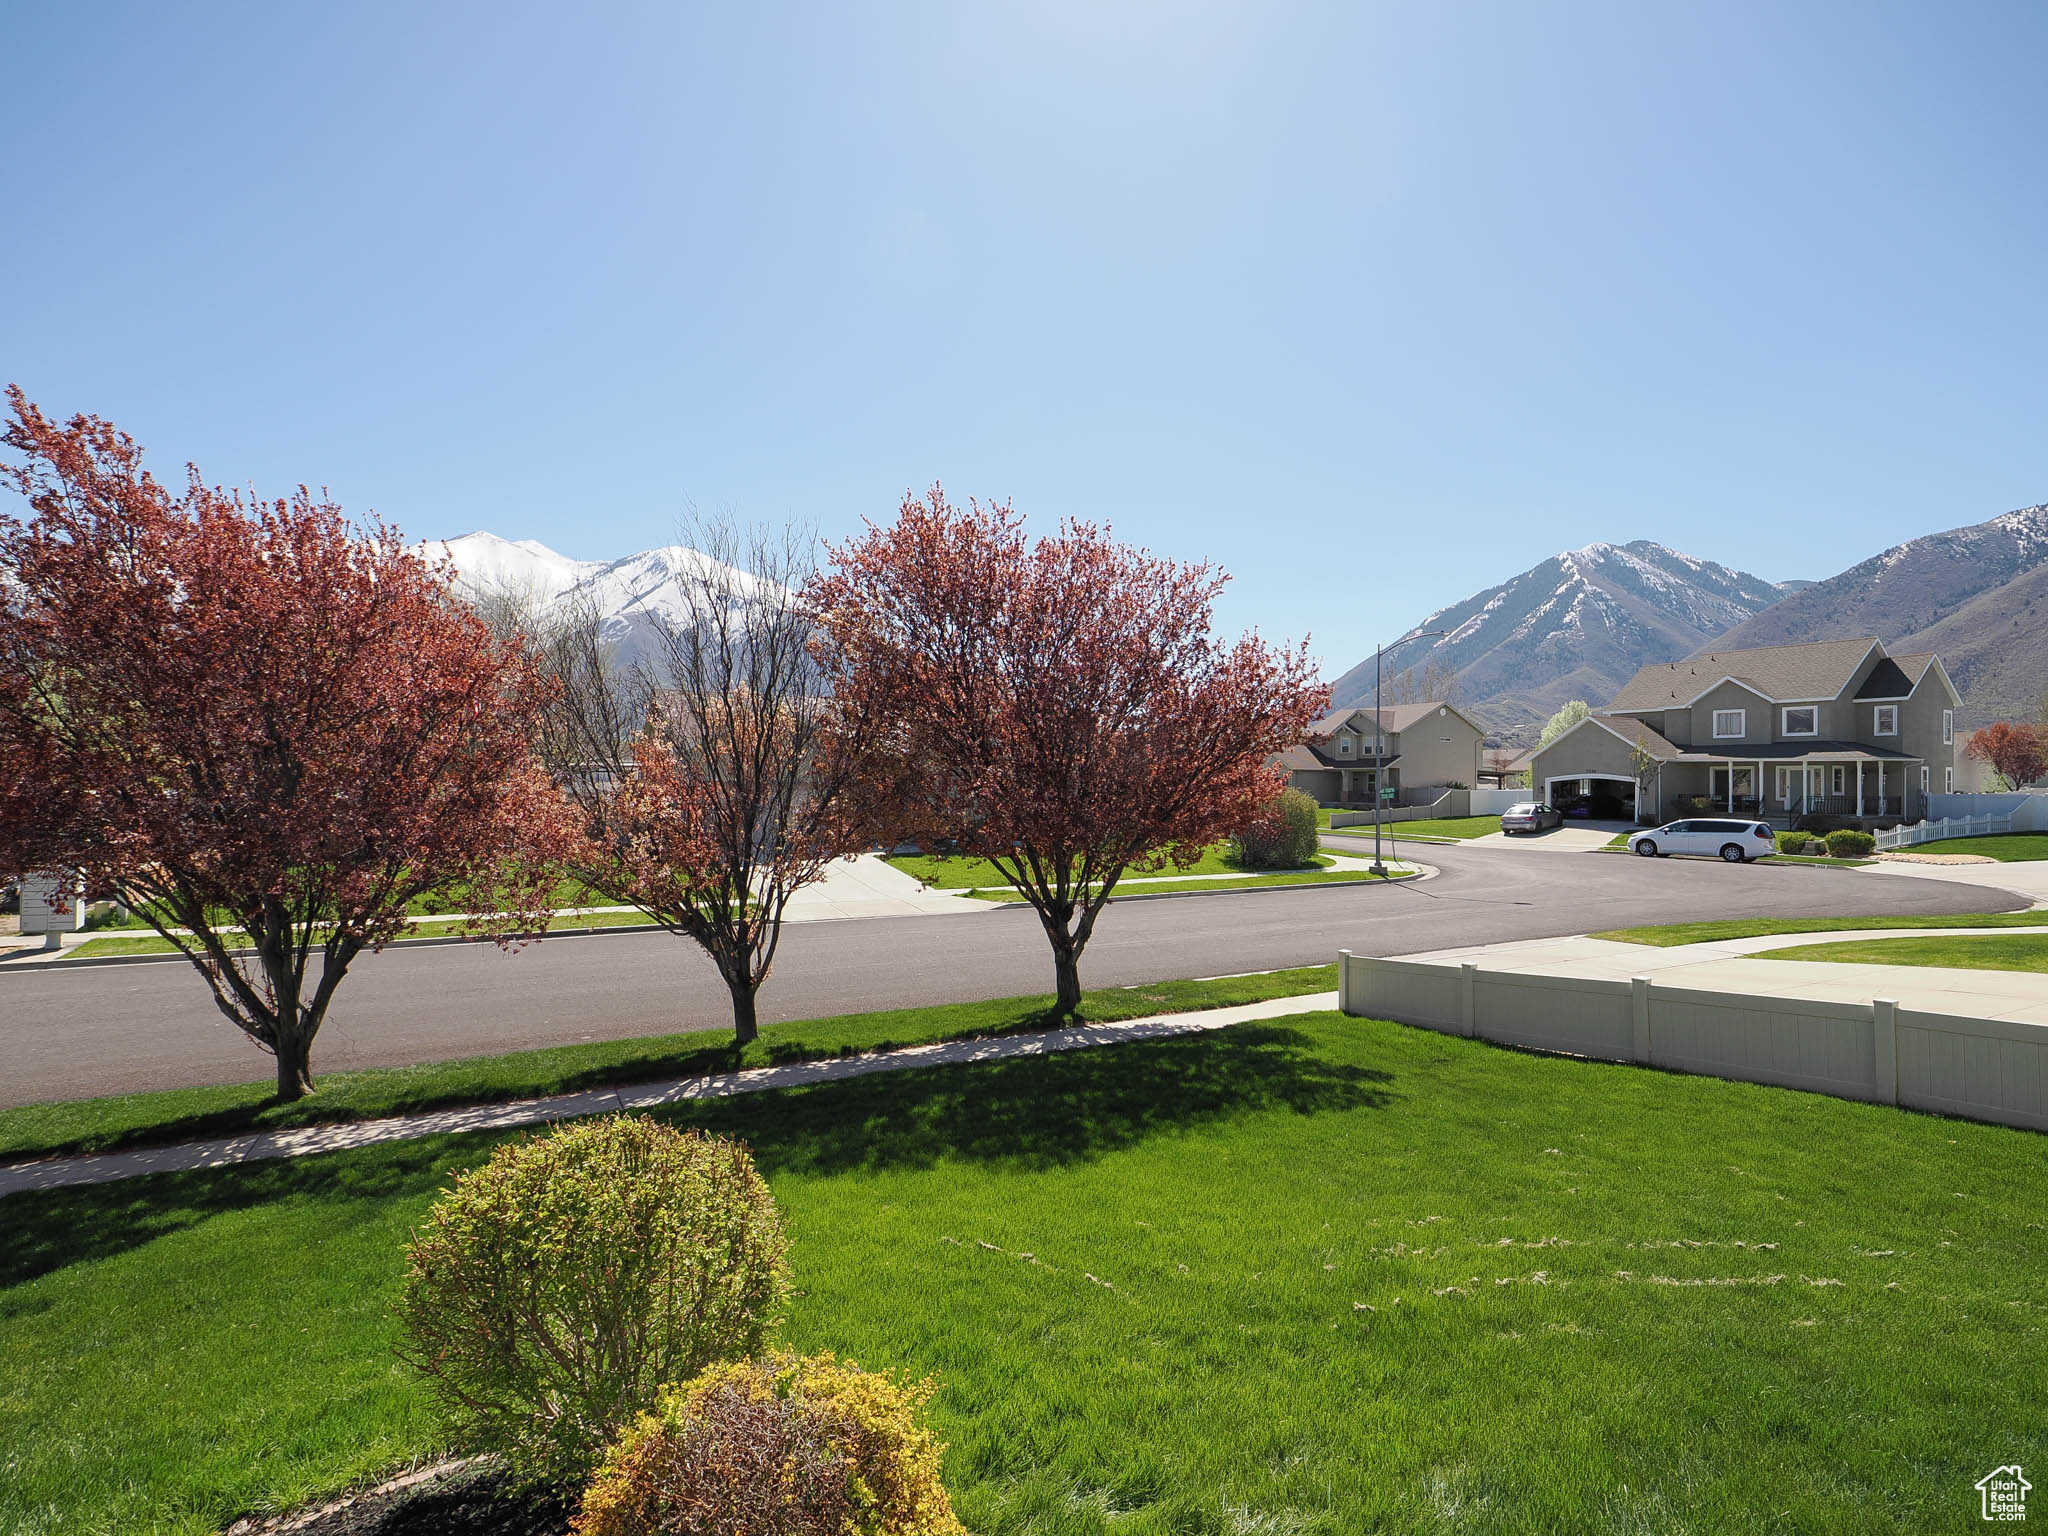 View of yard with a mountain view and flowering trees